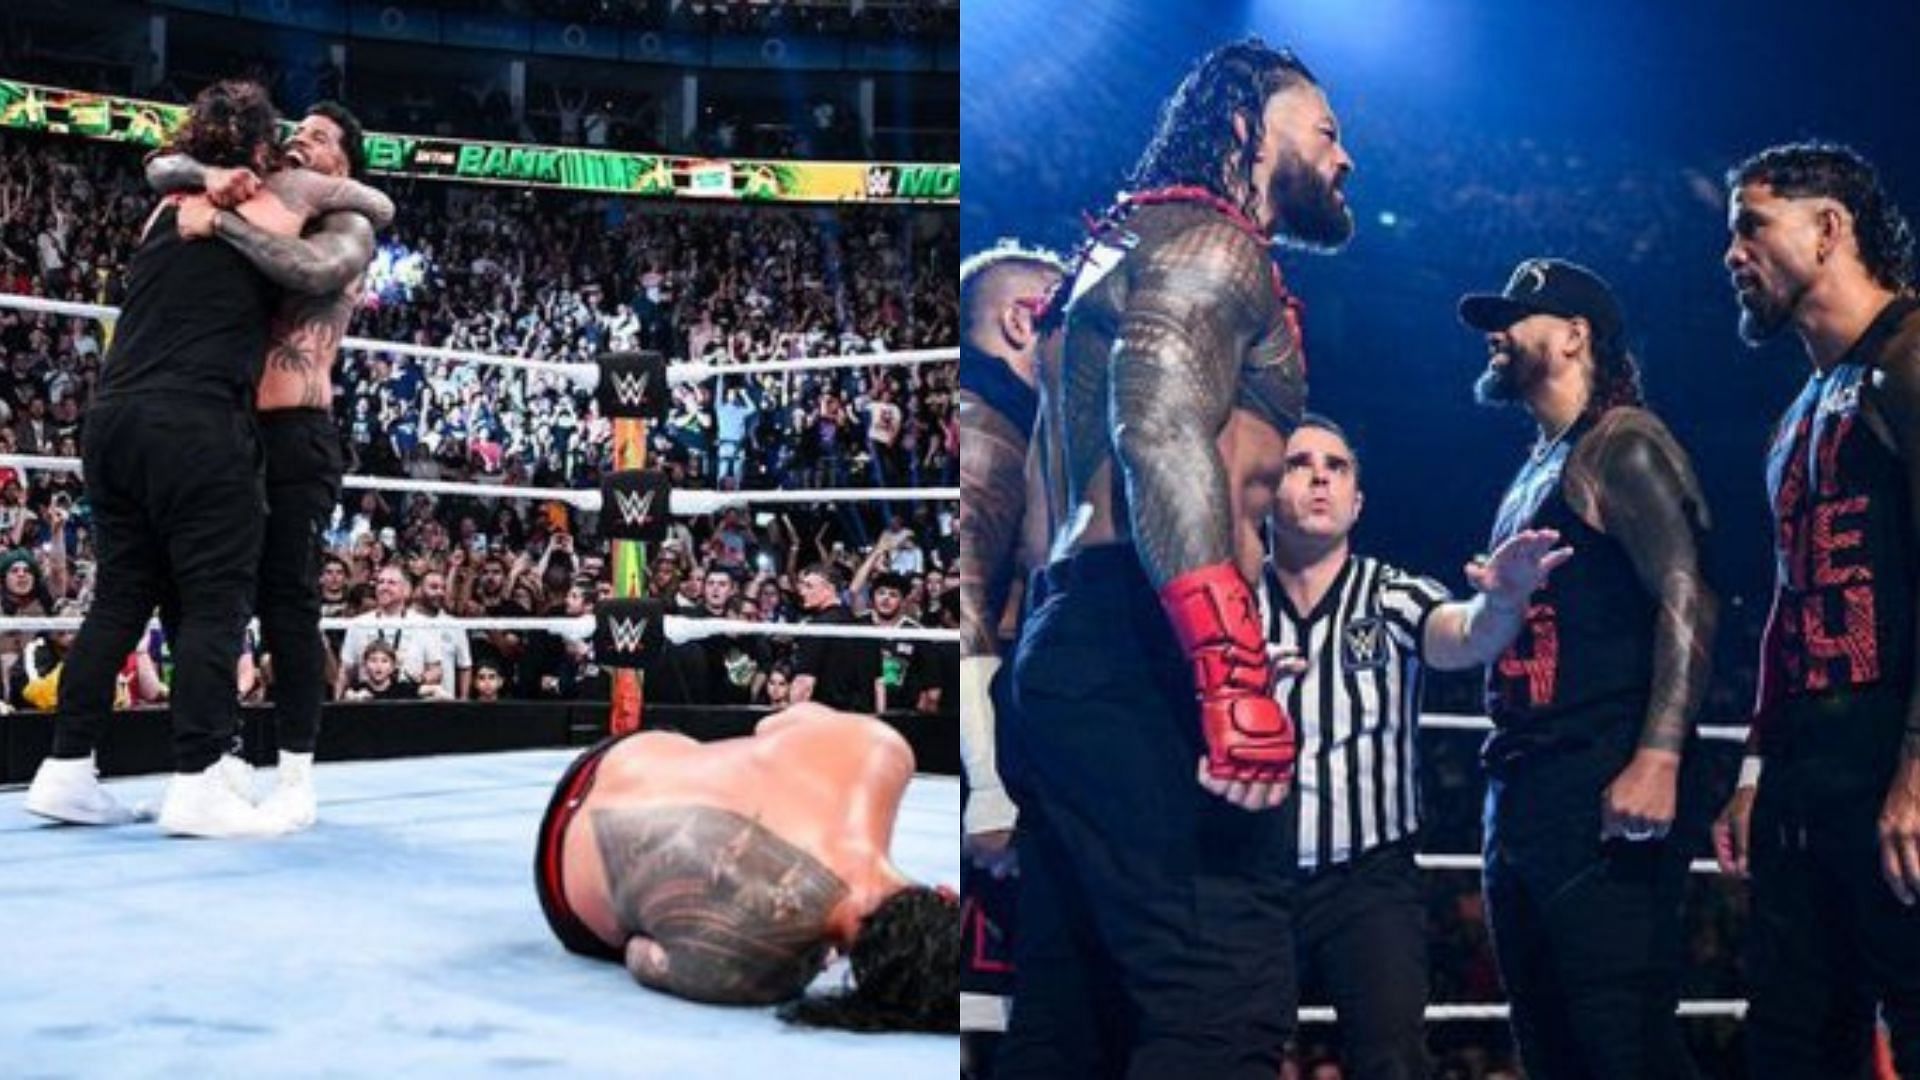 The Bloodline currently consists of Roman Reigns, Solo Sikoa, and Paul Heyman